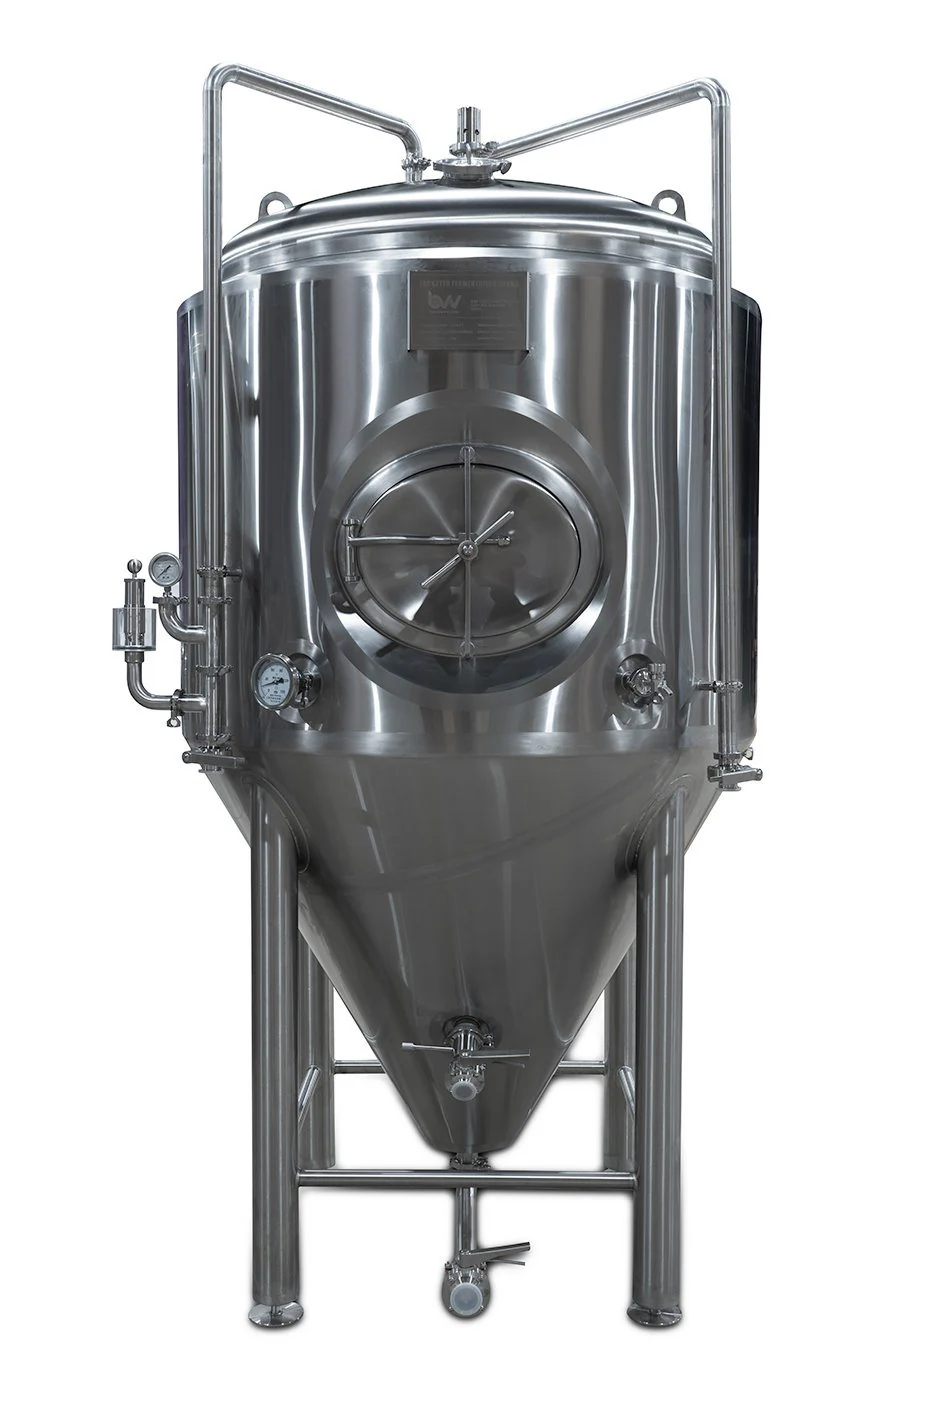 Does the 15 gal Jacketed Fermentation Tank come fully assembled?